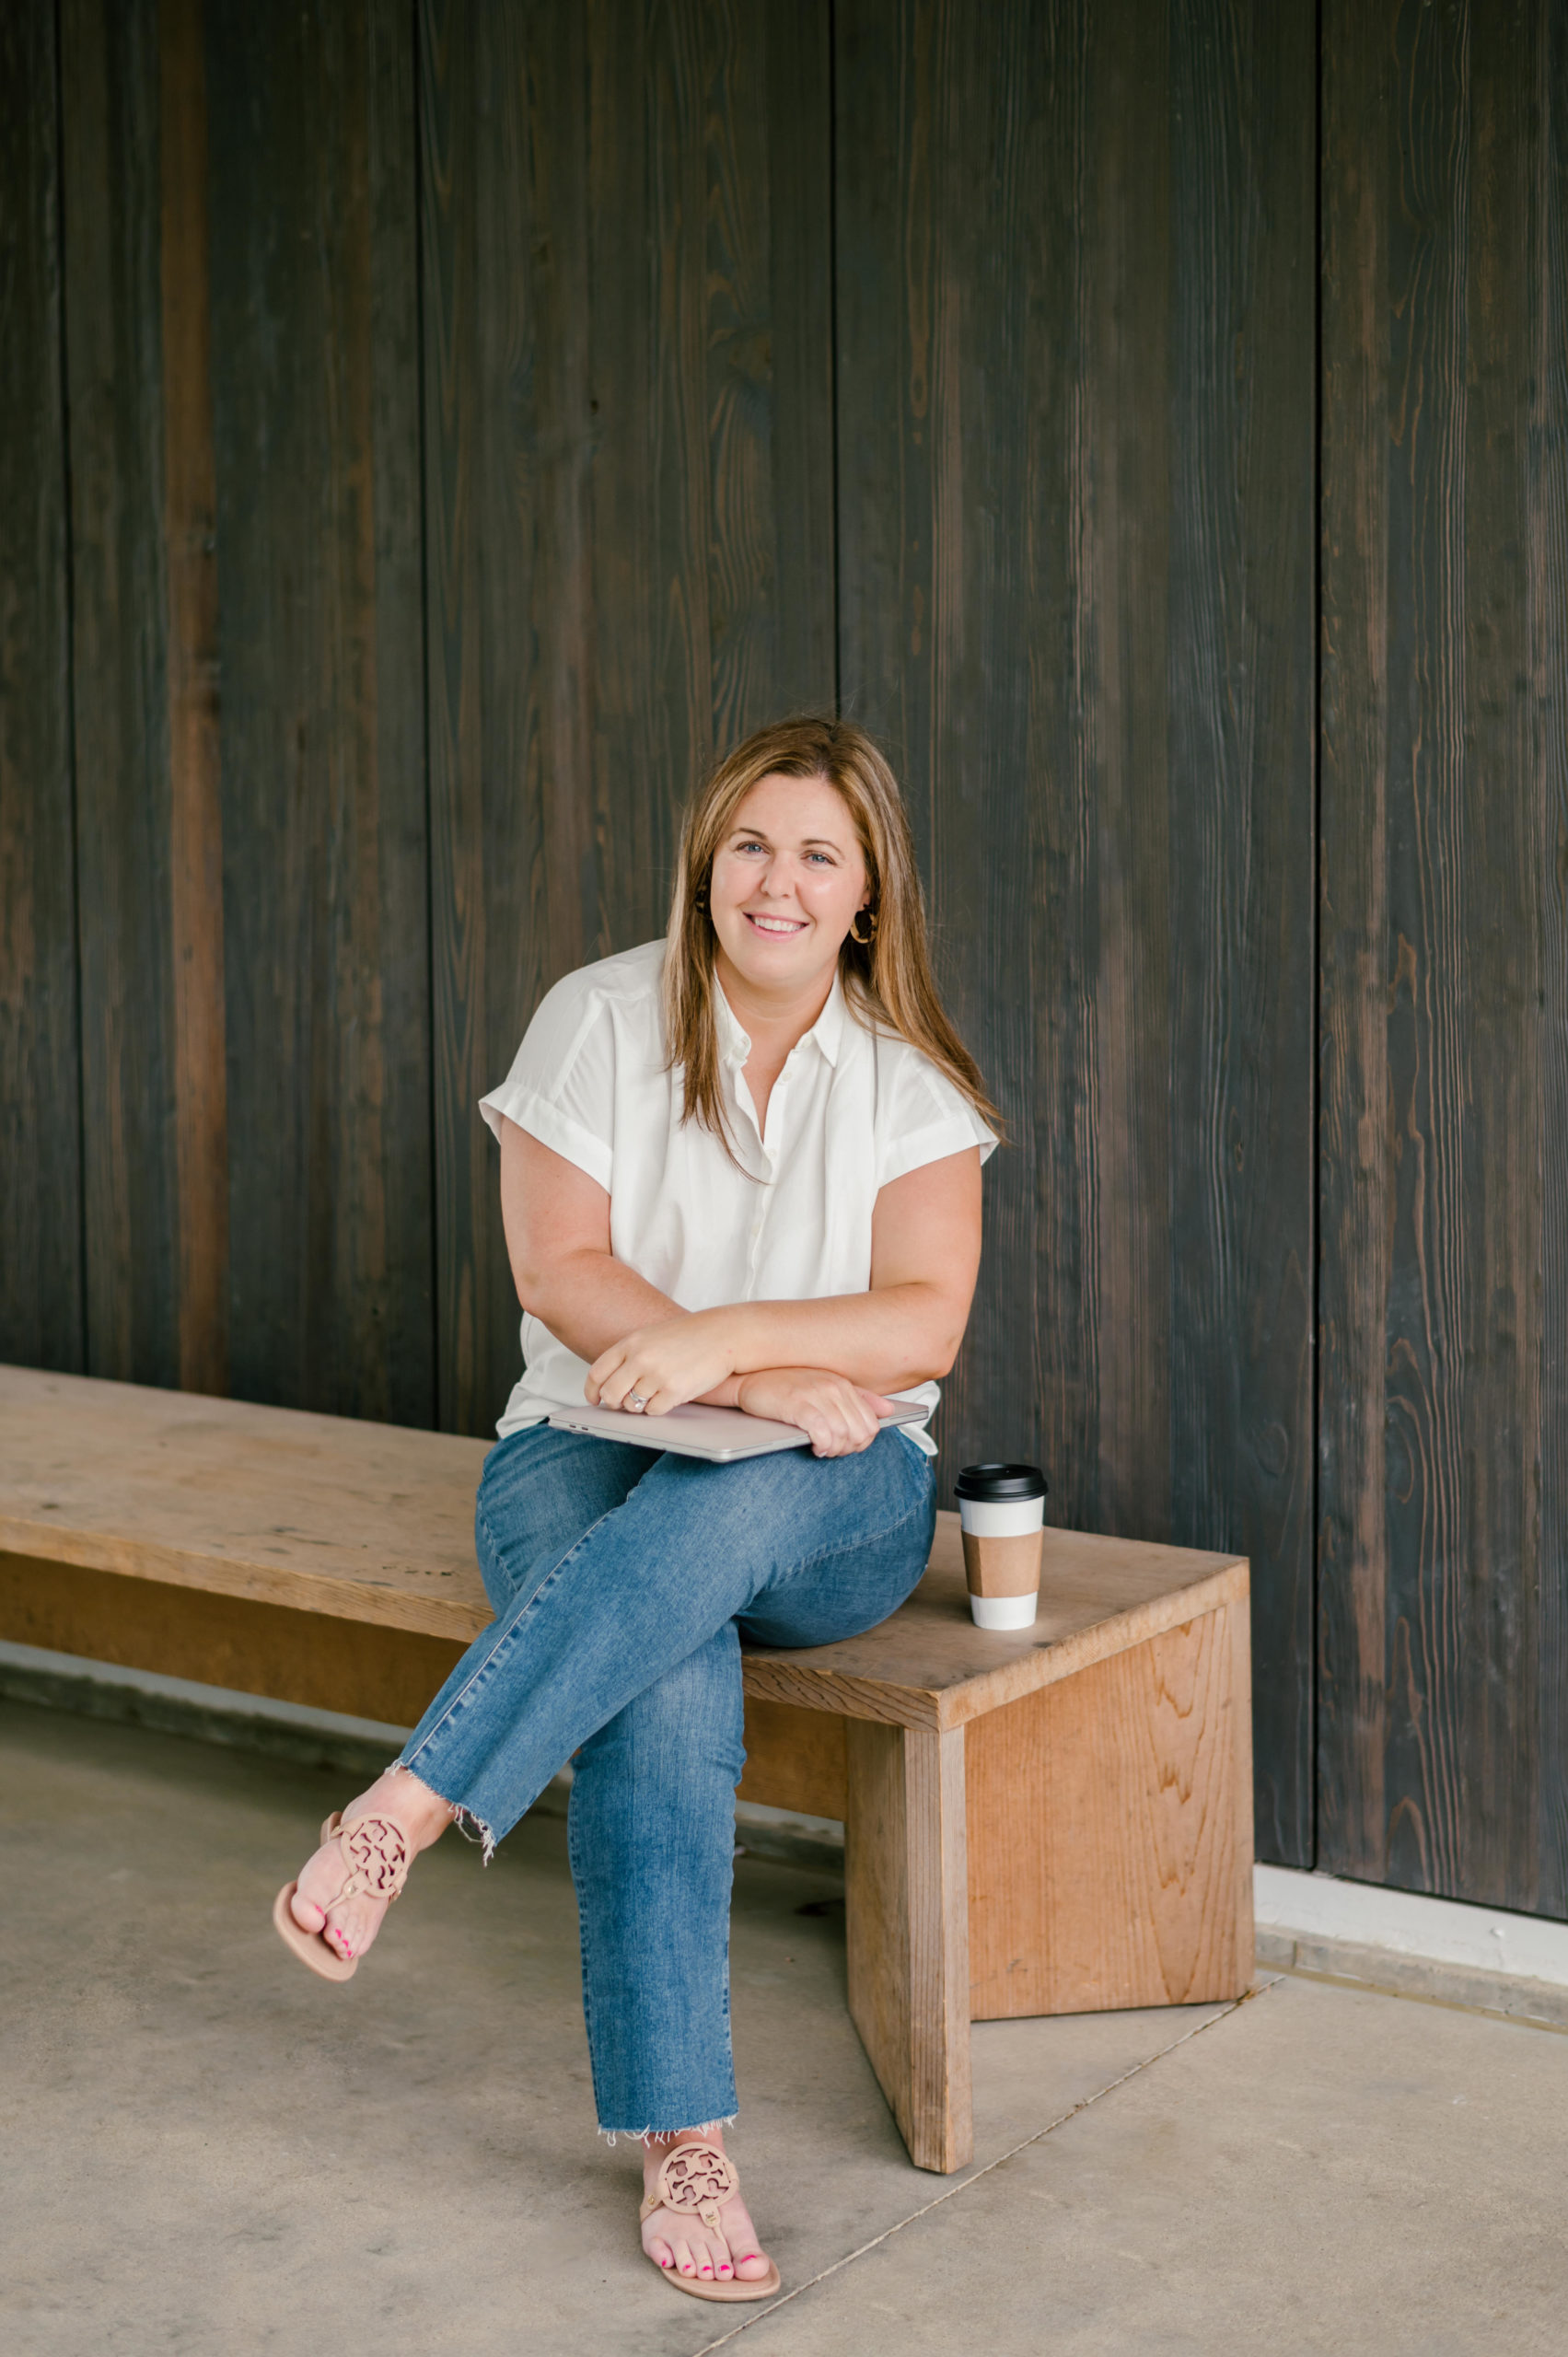 Woman sitting on a wooden bench criss crossing and smiling in a white blouse and blue jeans her personal brand photos